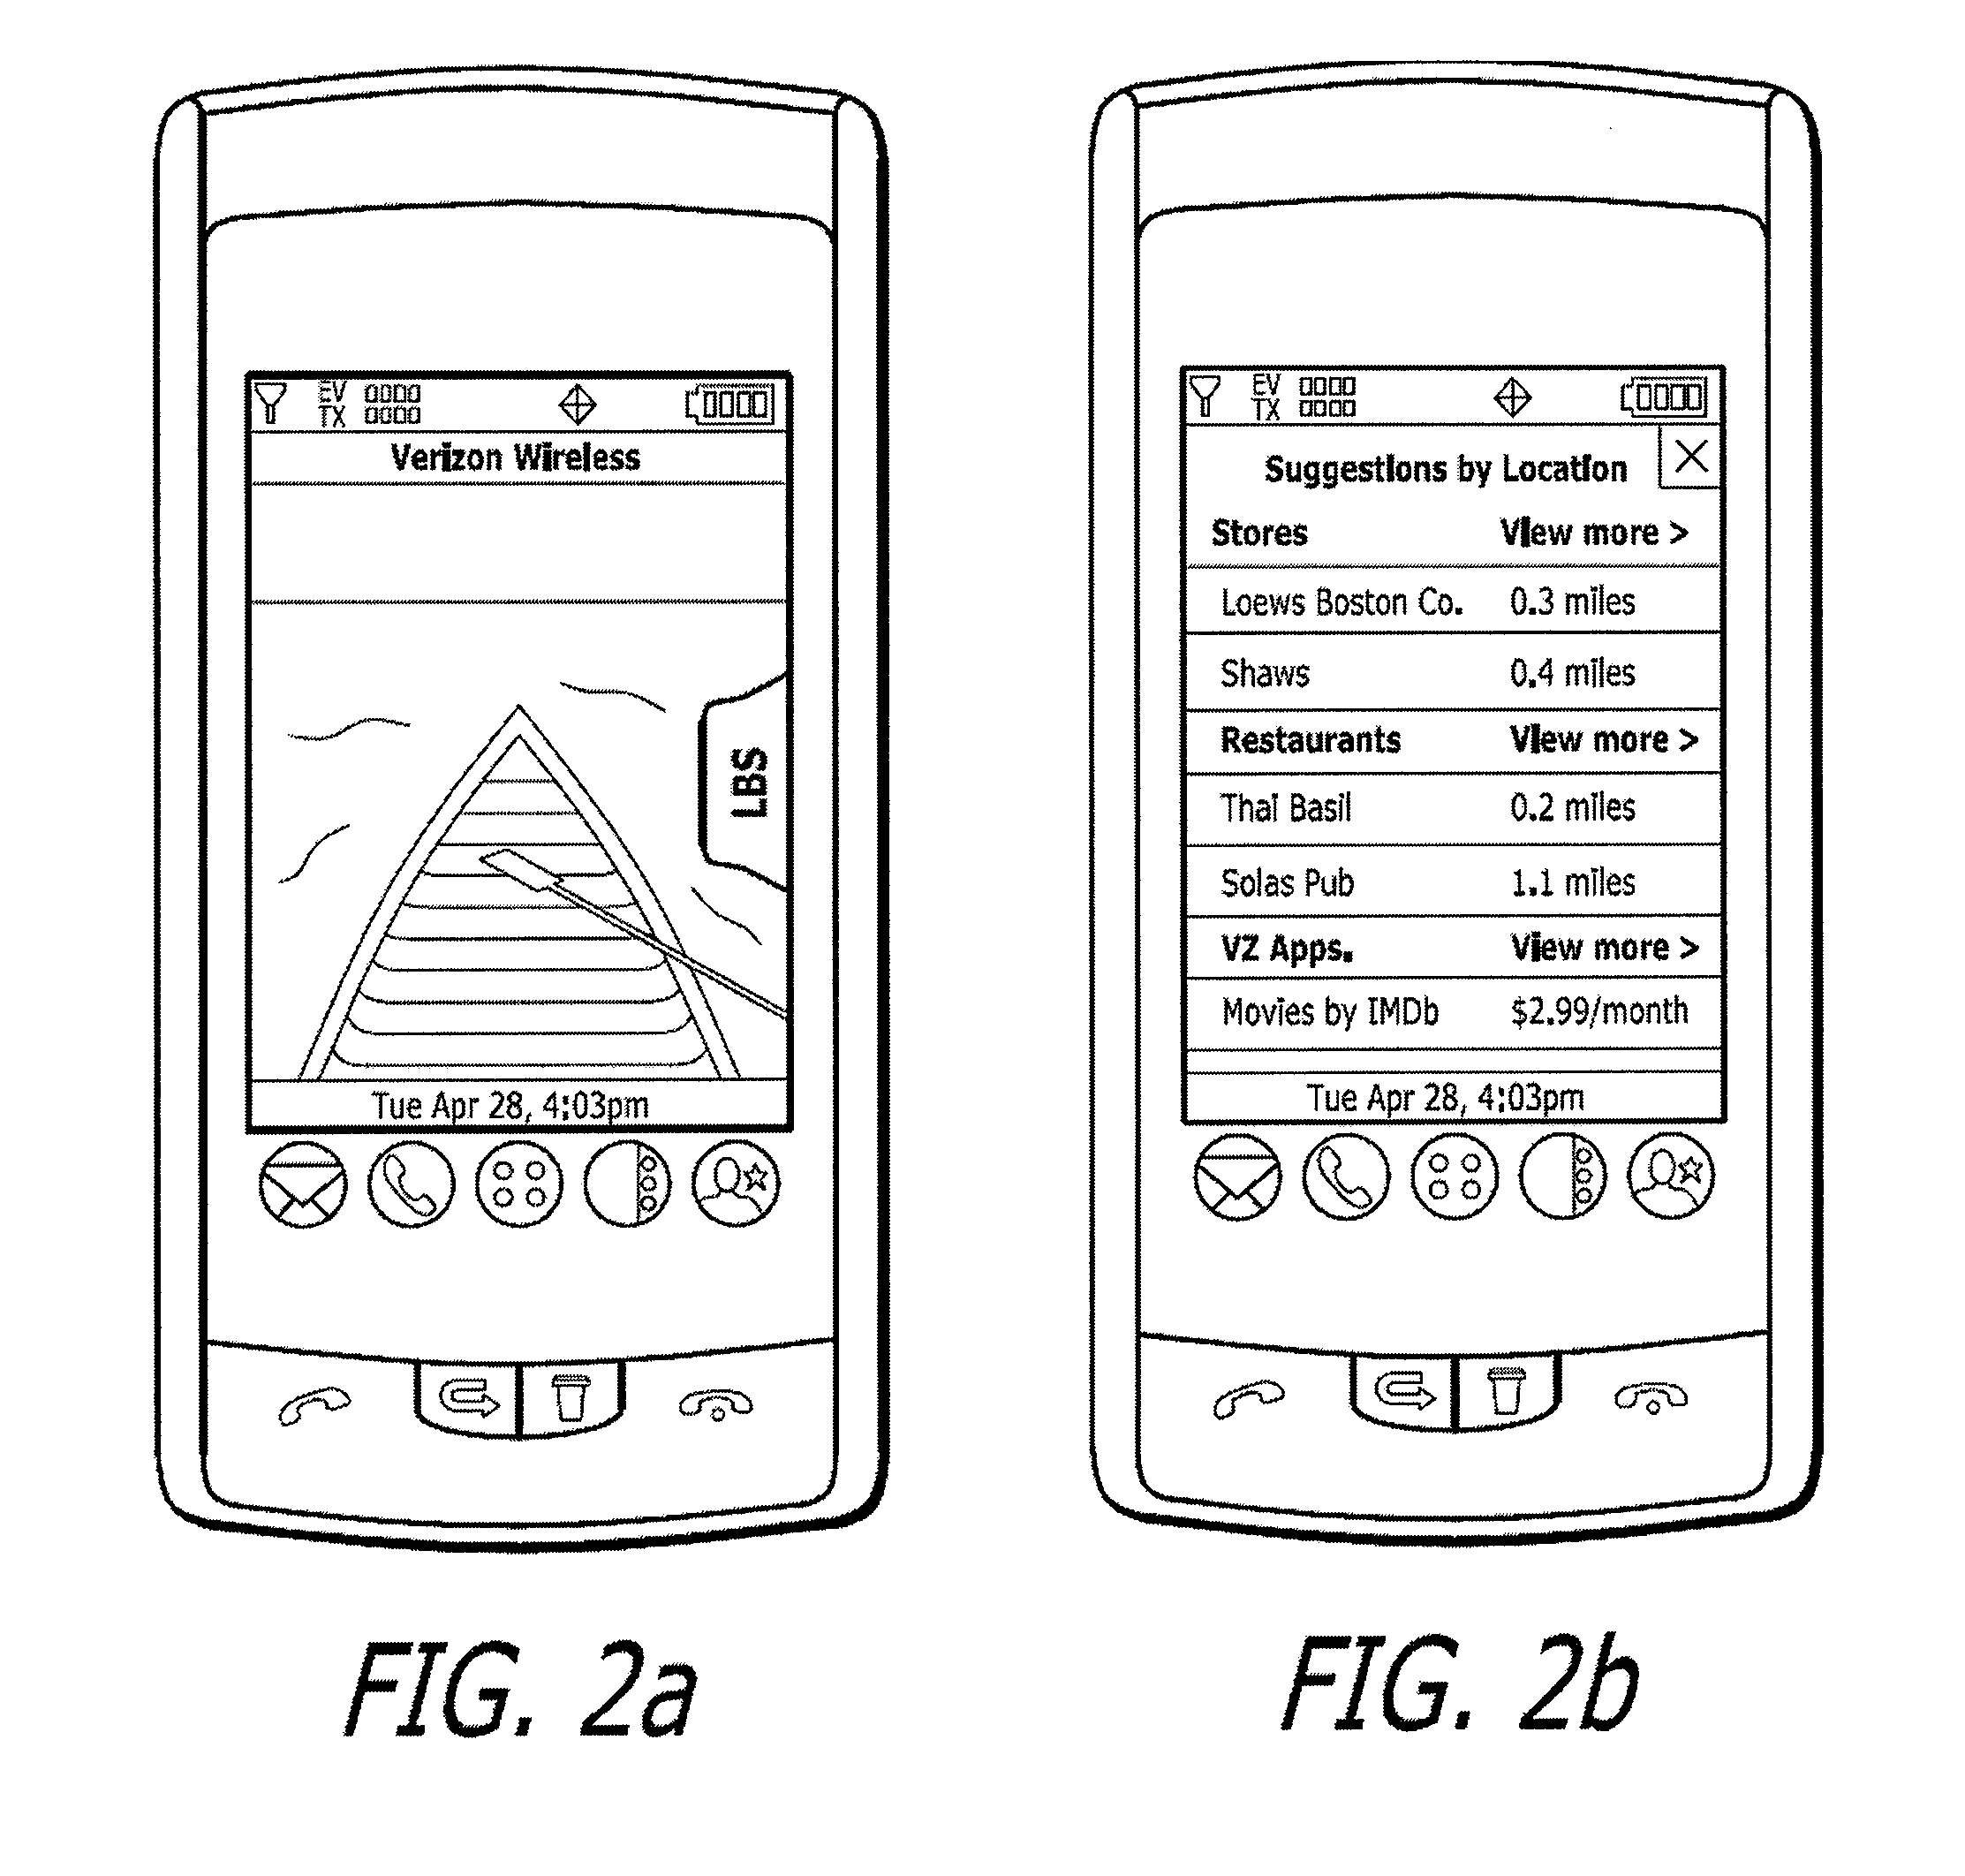 Application suggestions for mobile communication device based on location-based directory information